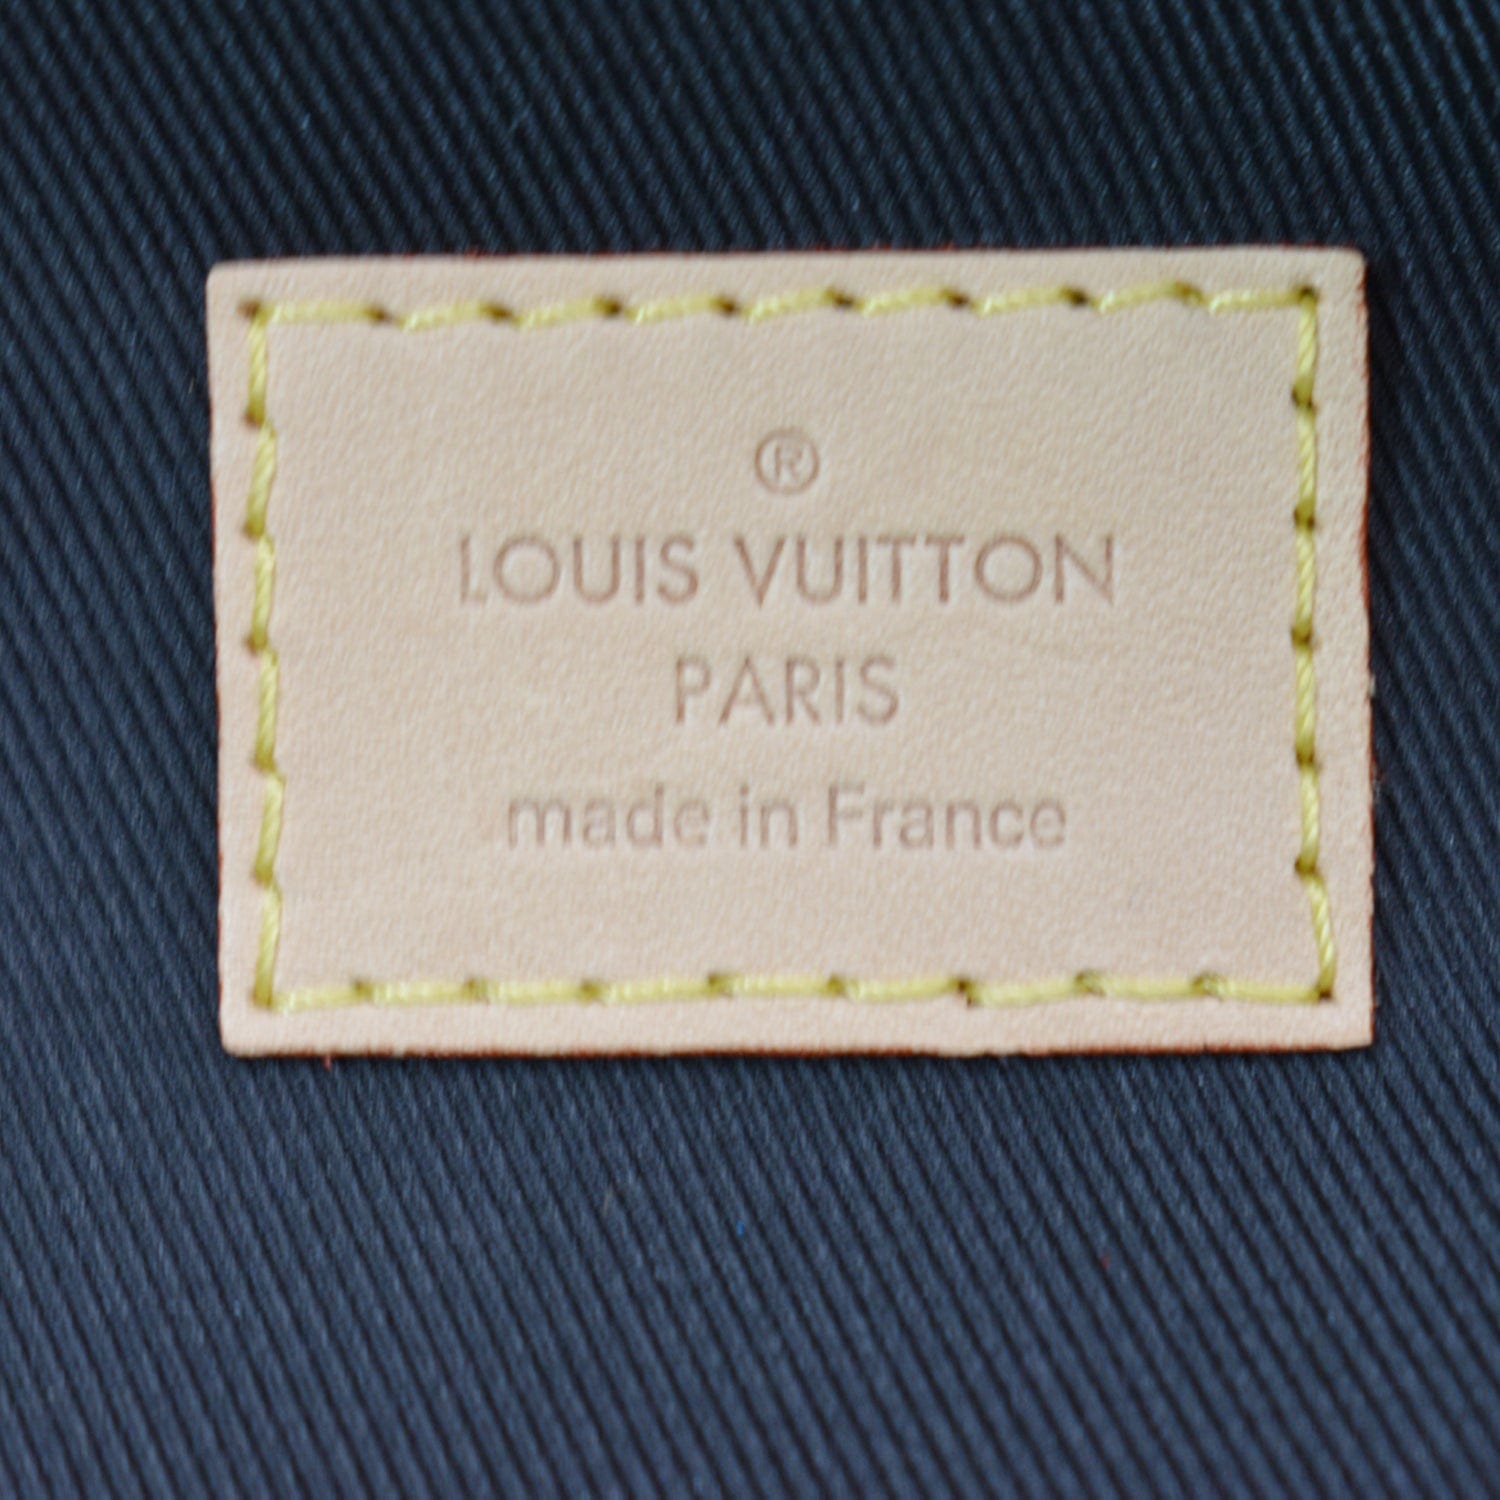 Pin by ㅤ on wøćk  Banner, Louis vuitton, Personalized items